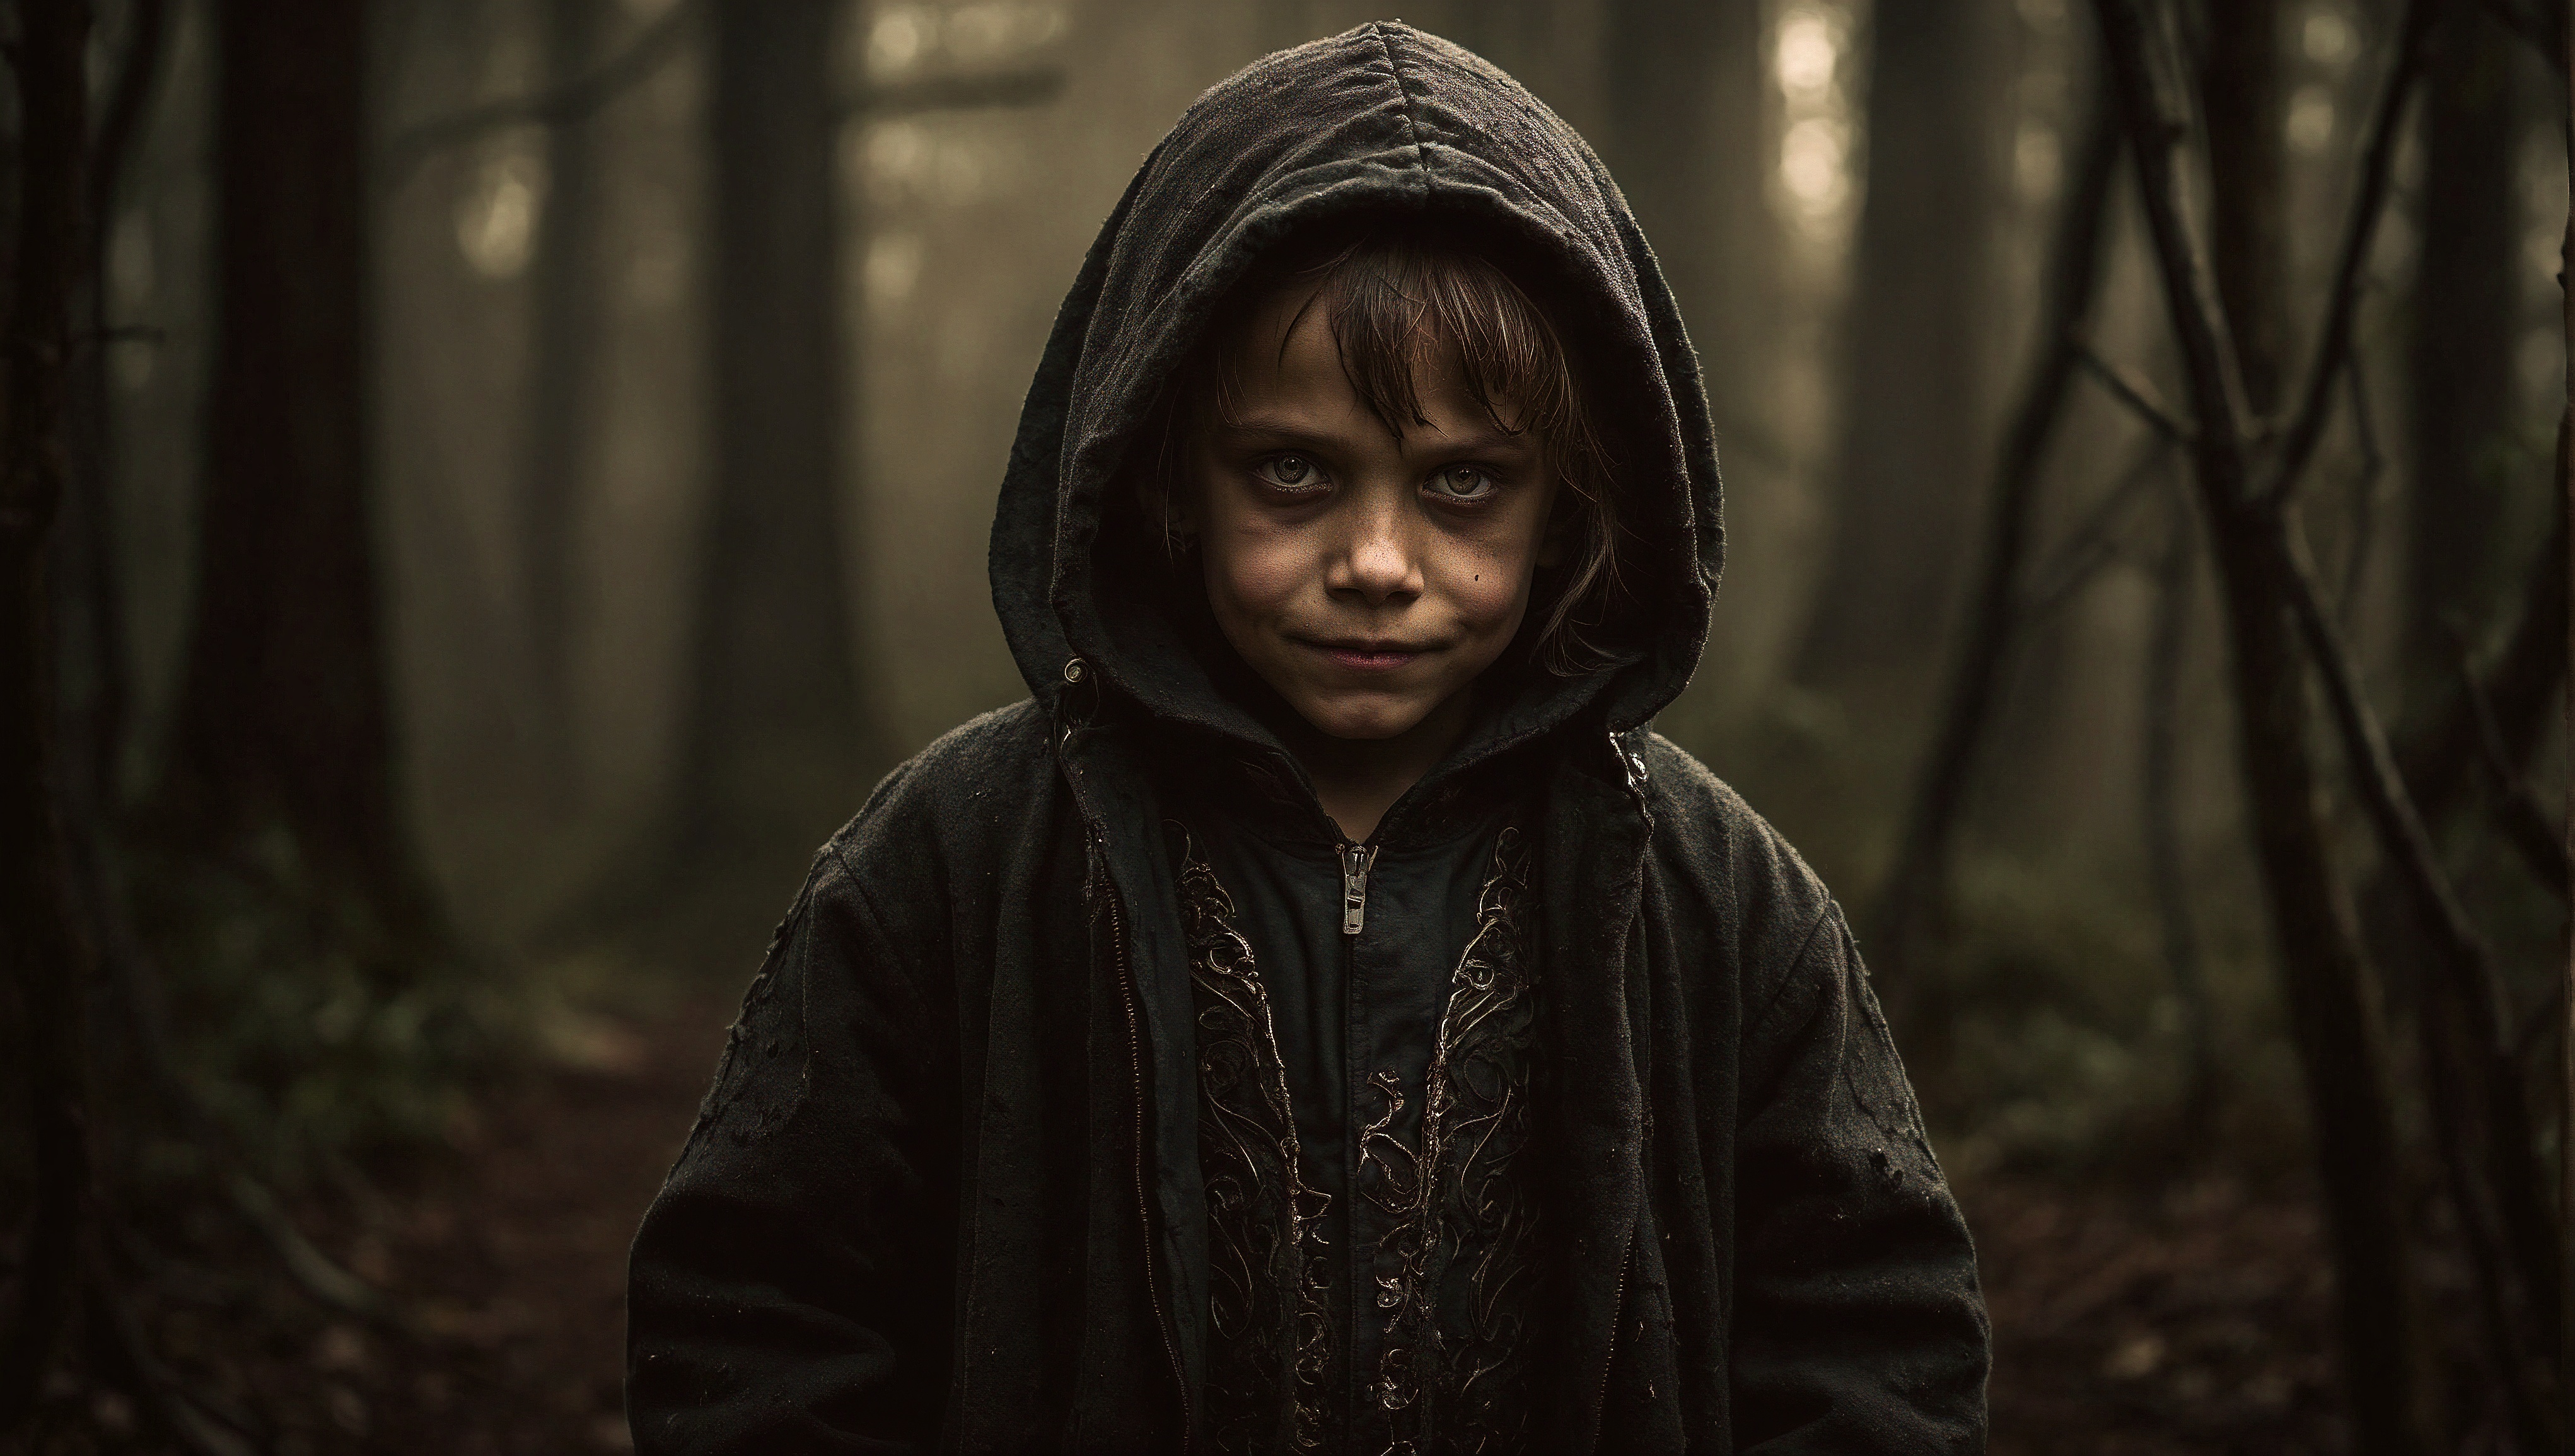 A boy in a hooded sweatshirt stands in the woods.